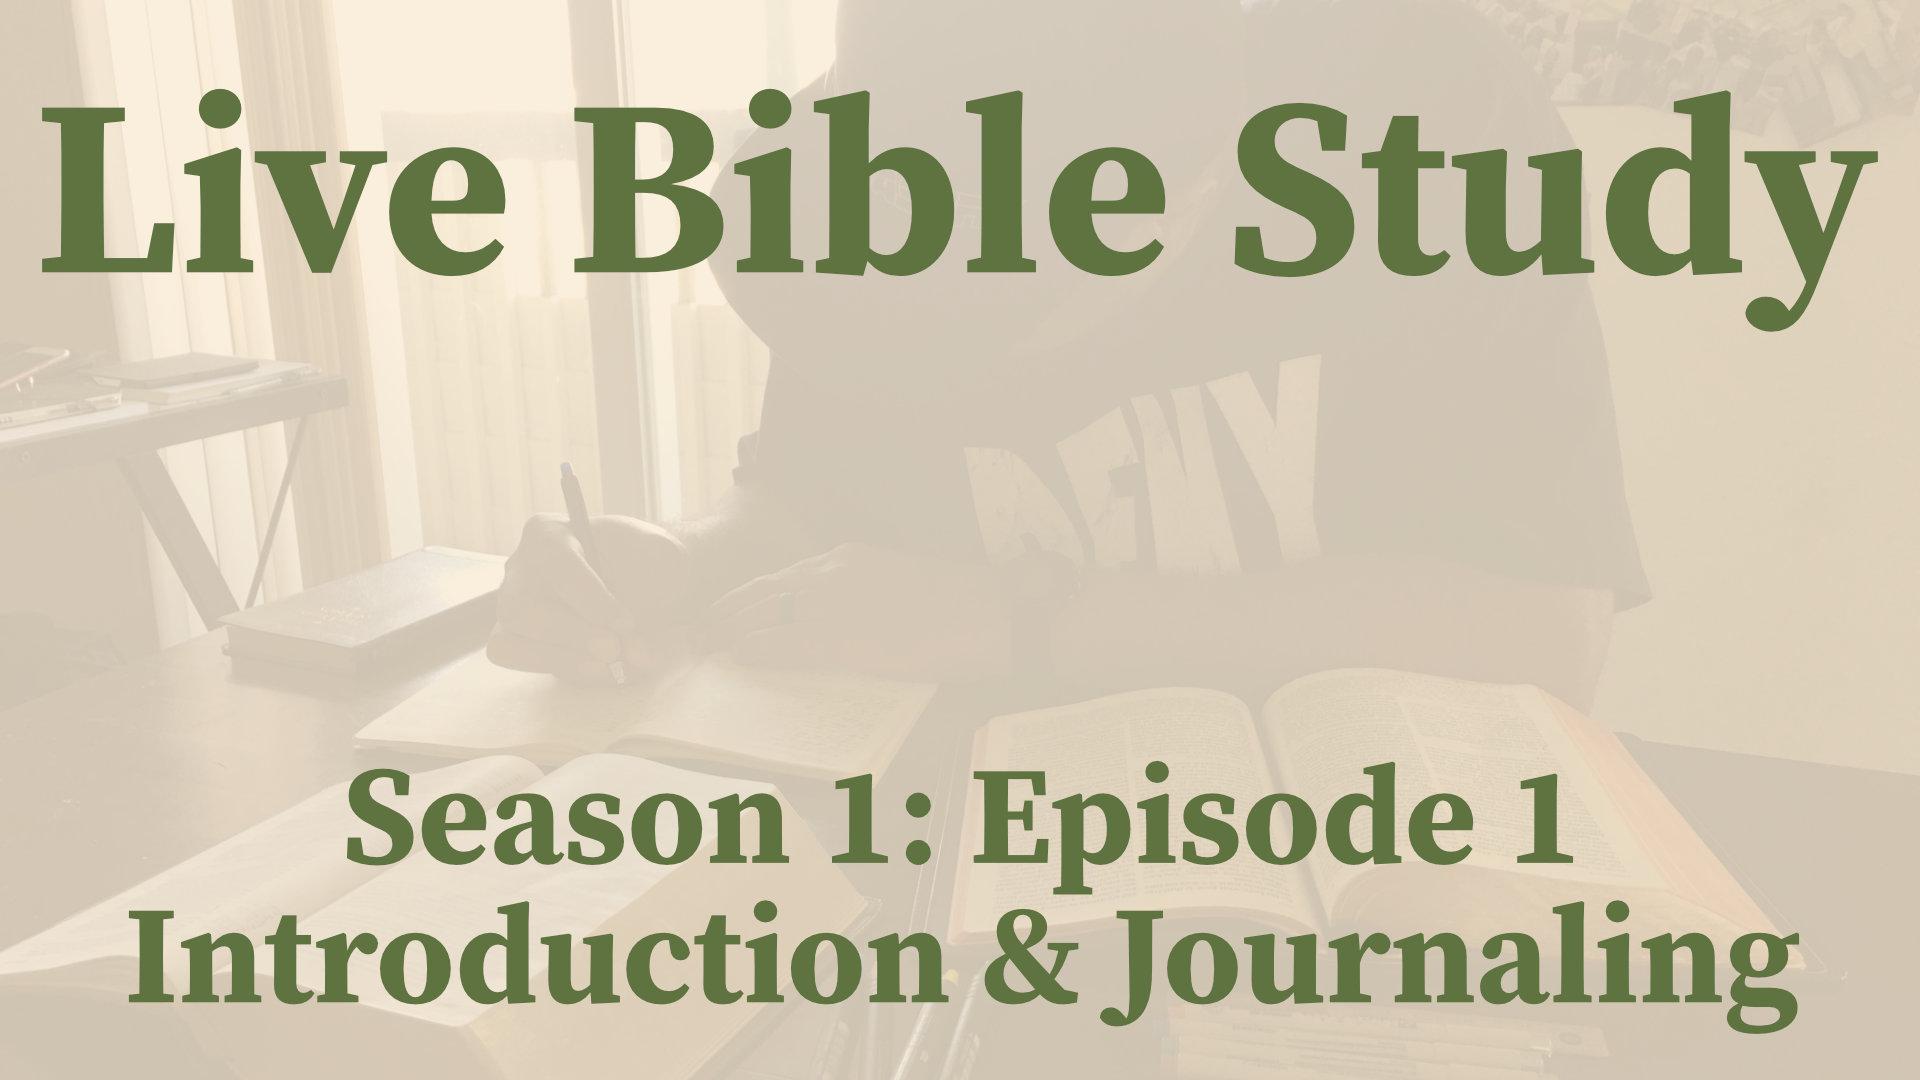 Live Bible Study Introduction (S1: Episode 1)